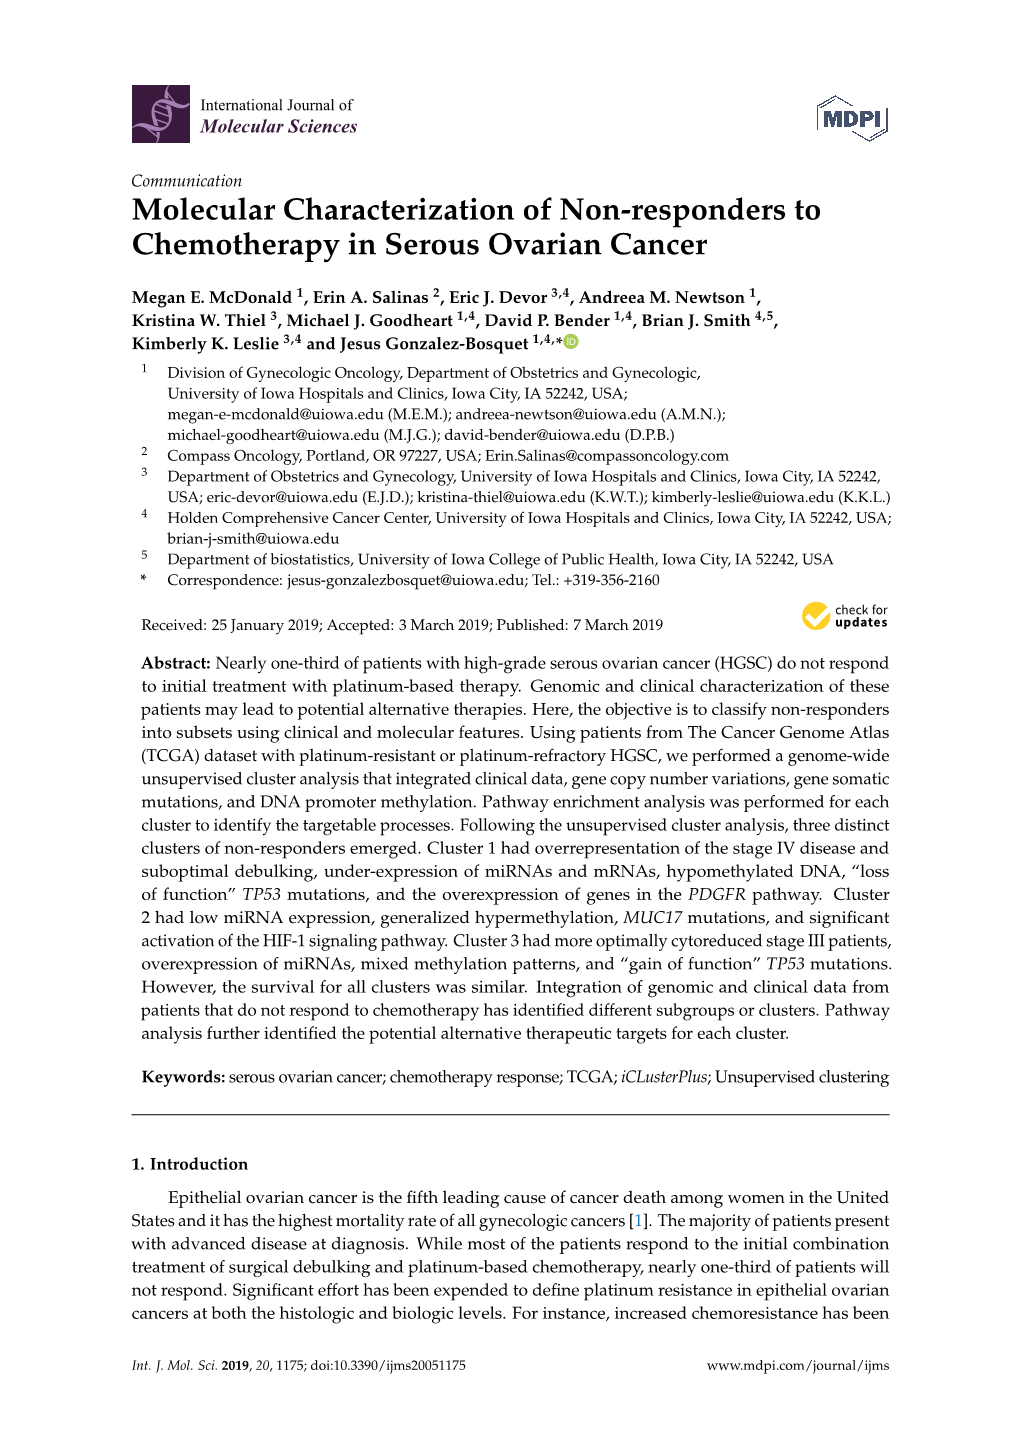 Molecular Characterization of Non-Responders to Chemotherapy in Serous Ovarian Cancer